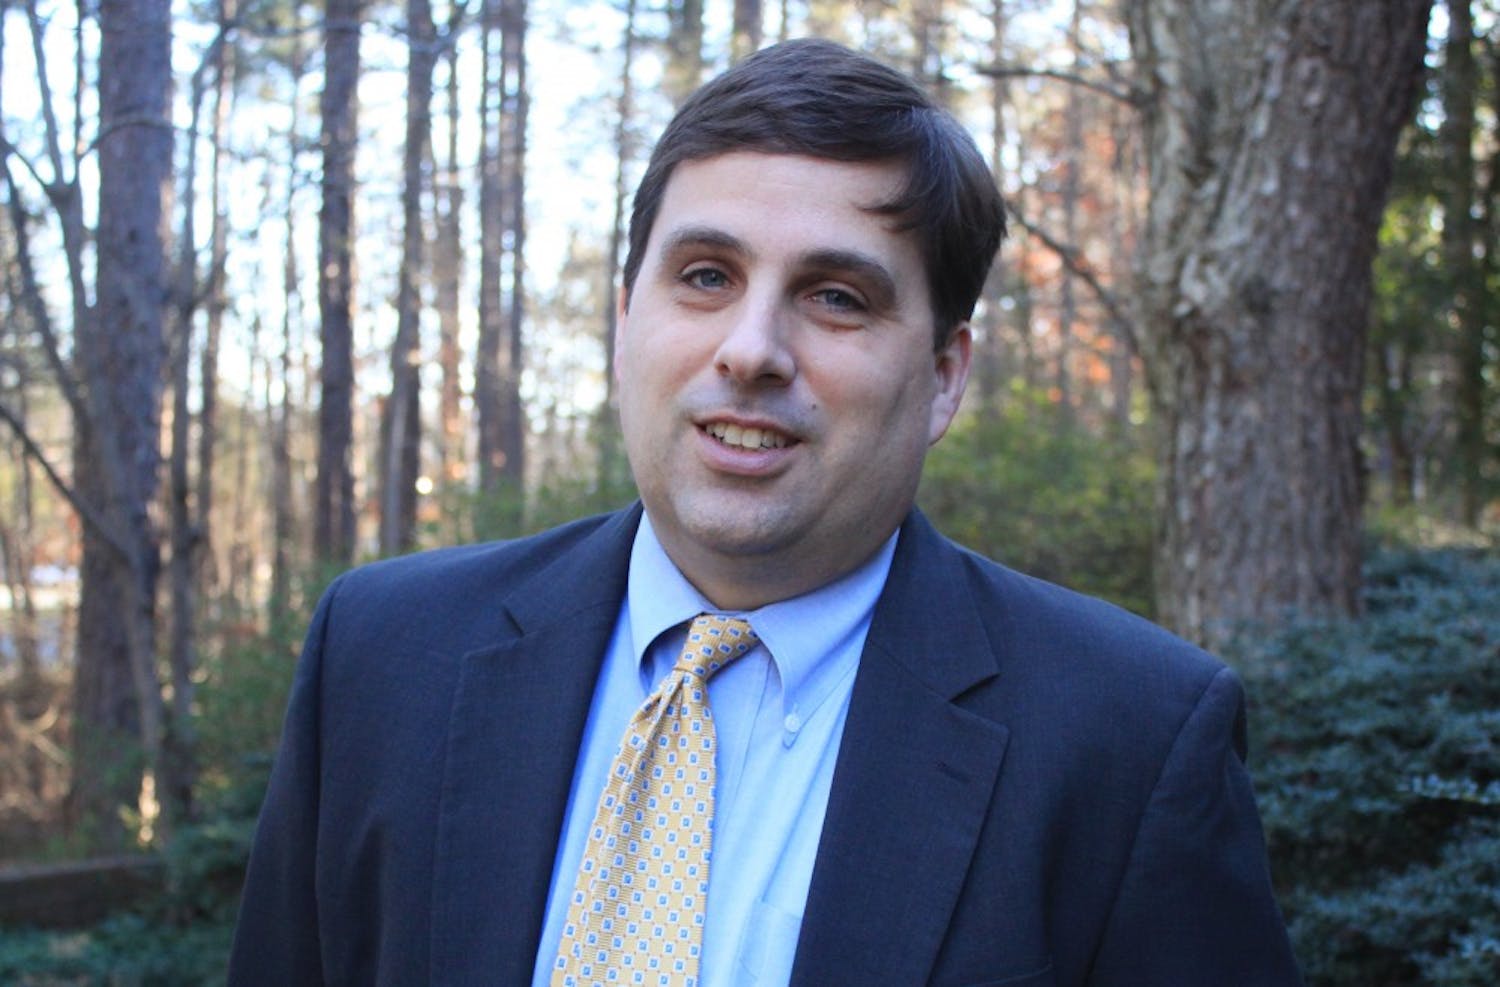 Andrew Moretz is a new lobbyist for UNC. He is VP of State Government Relations at University of North Carolina General Administration.